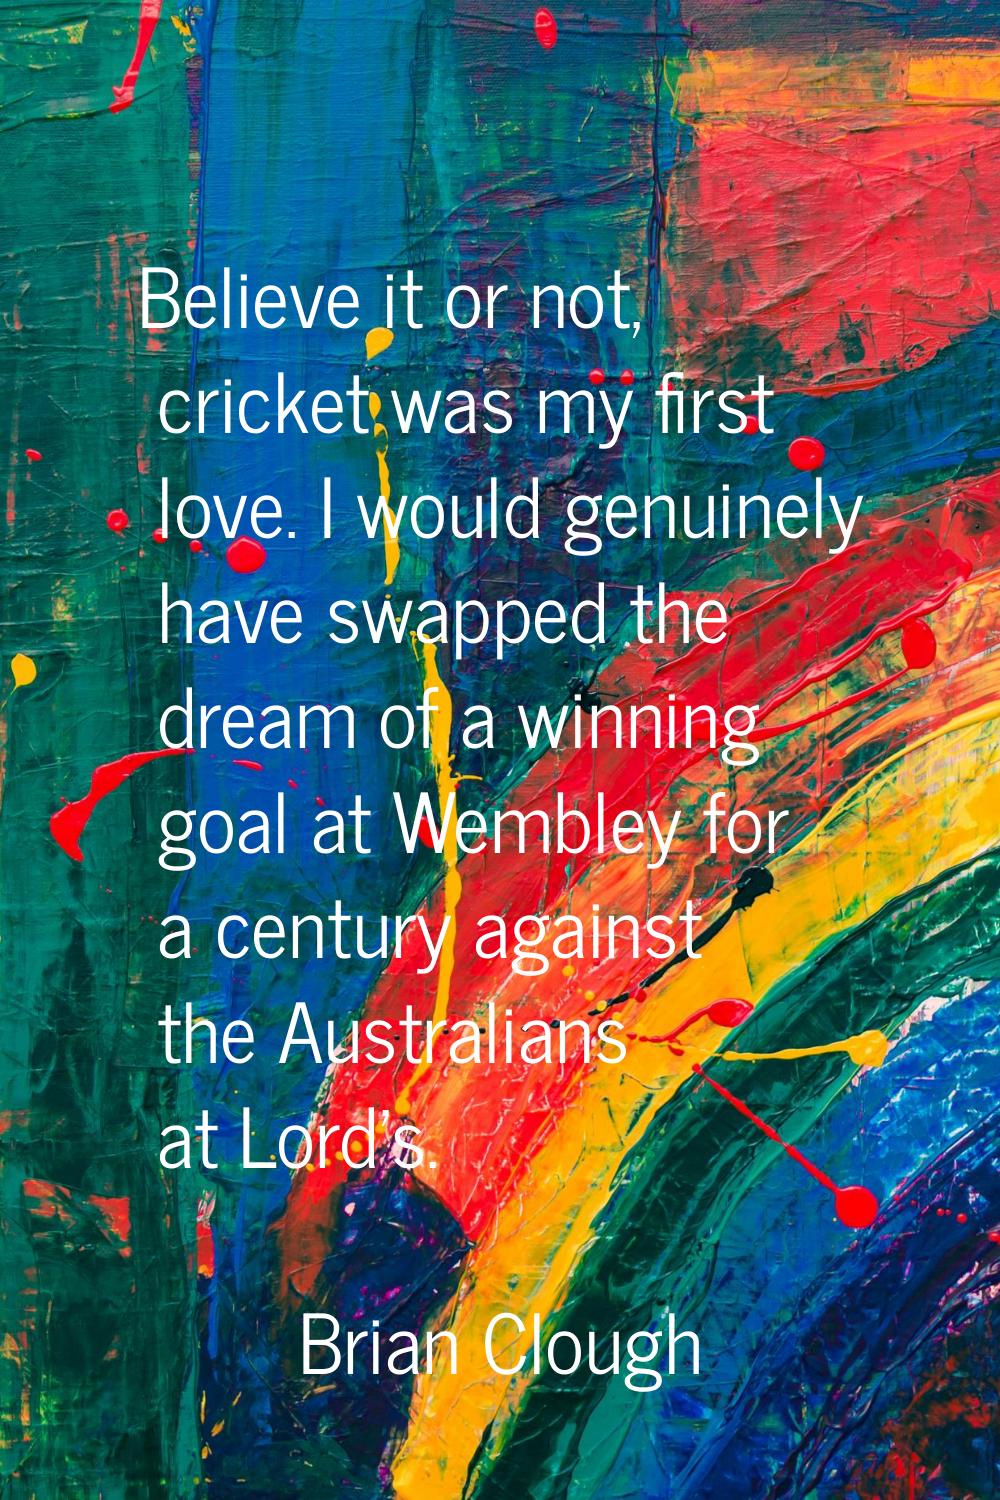 Believe it or not, cricket was my first love. I would genuinely have swapped the dream of a winning